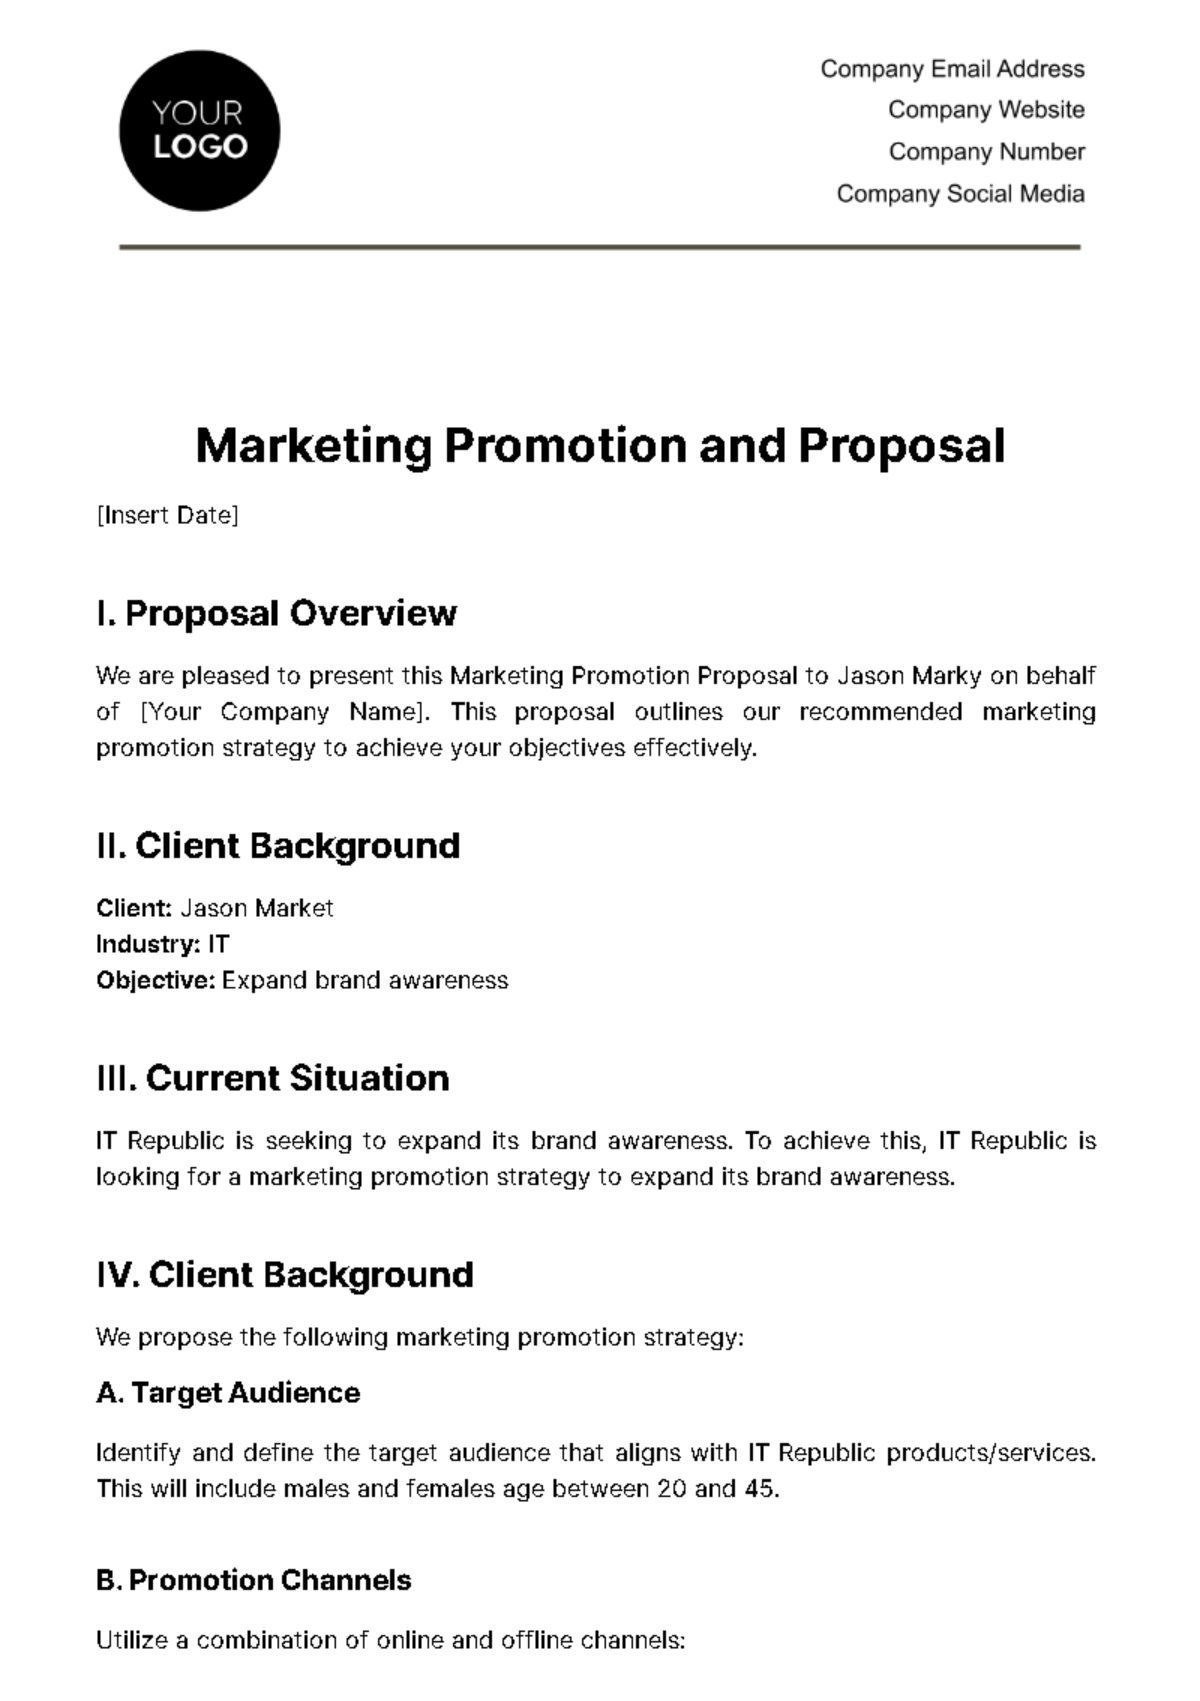 Marketing Promotion Proposal Template